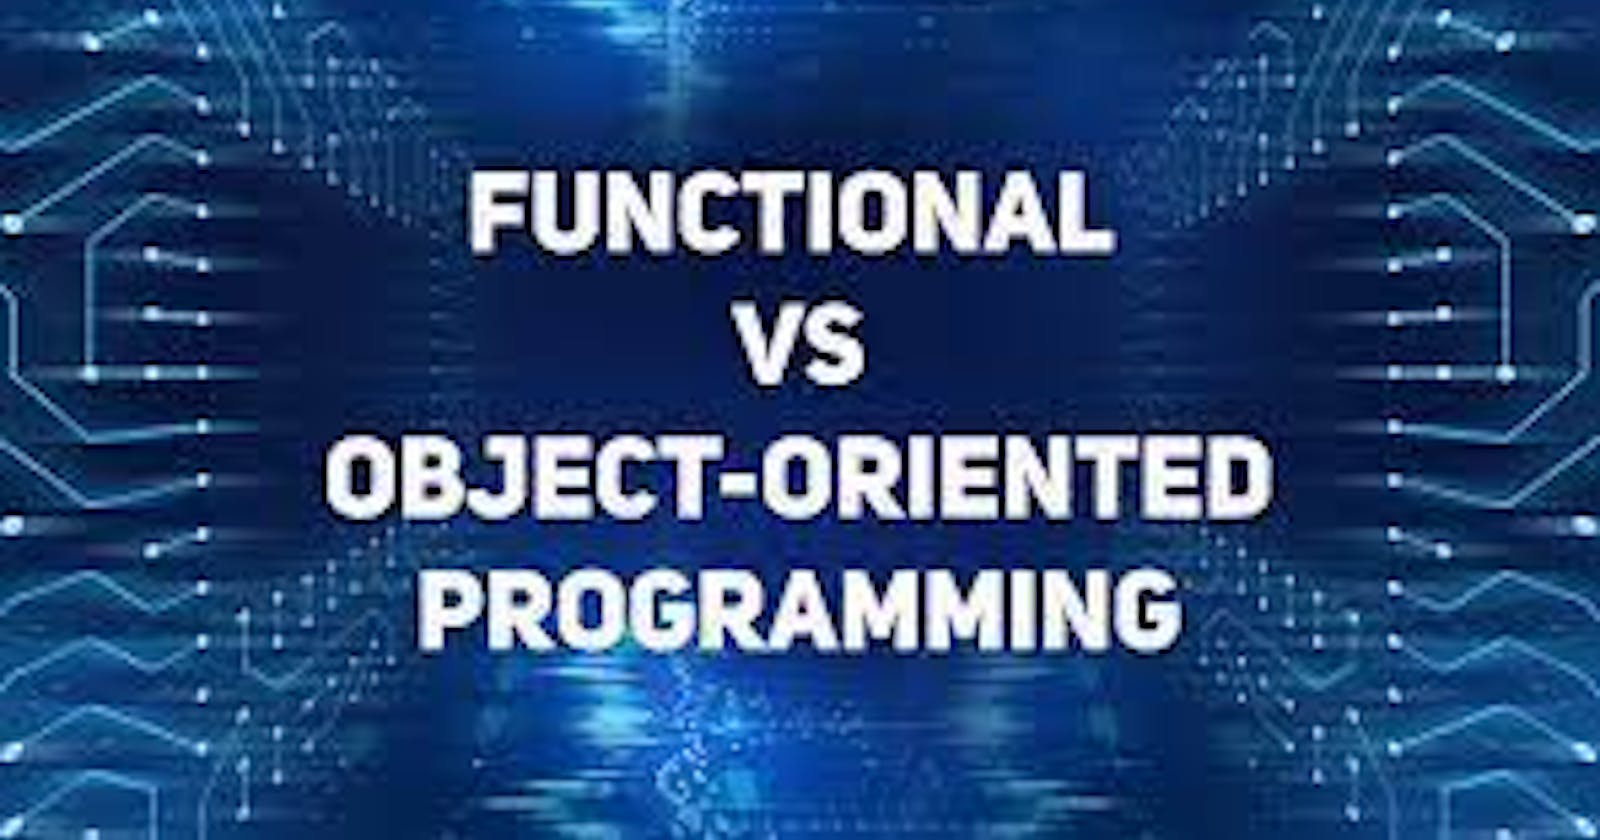 The difference between functional and object orientated programming.